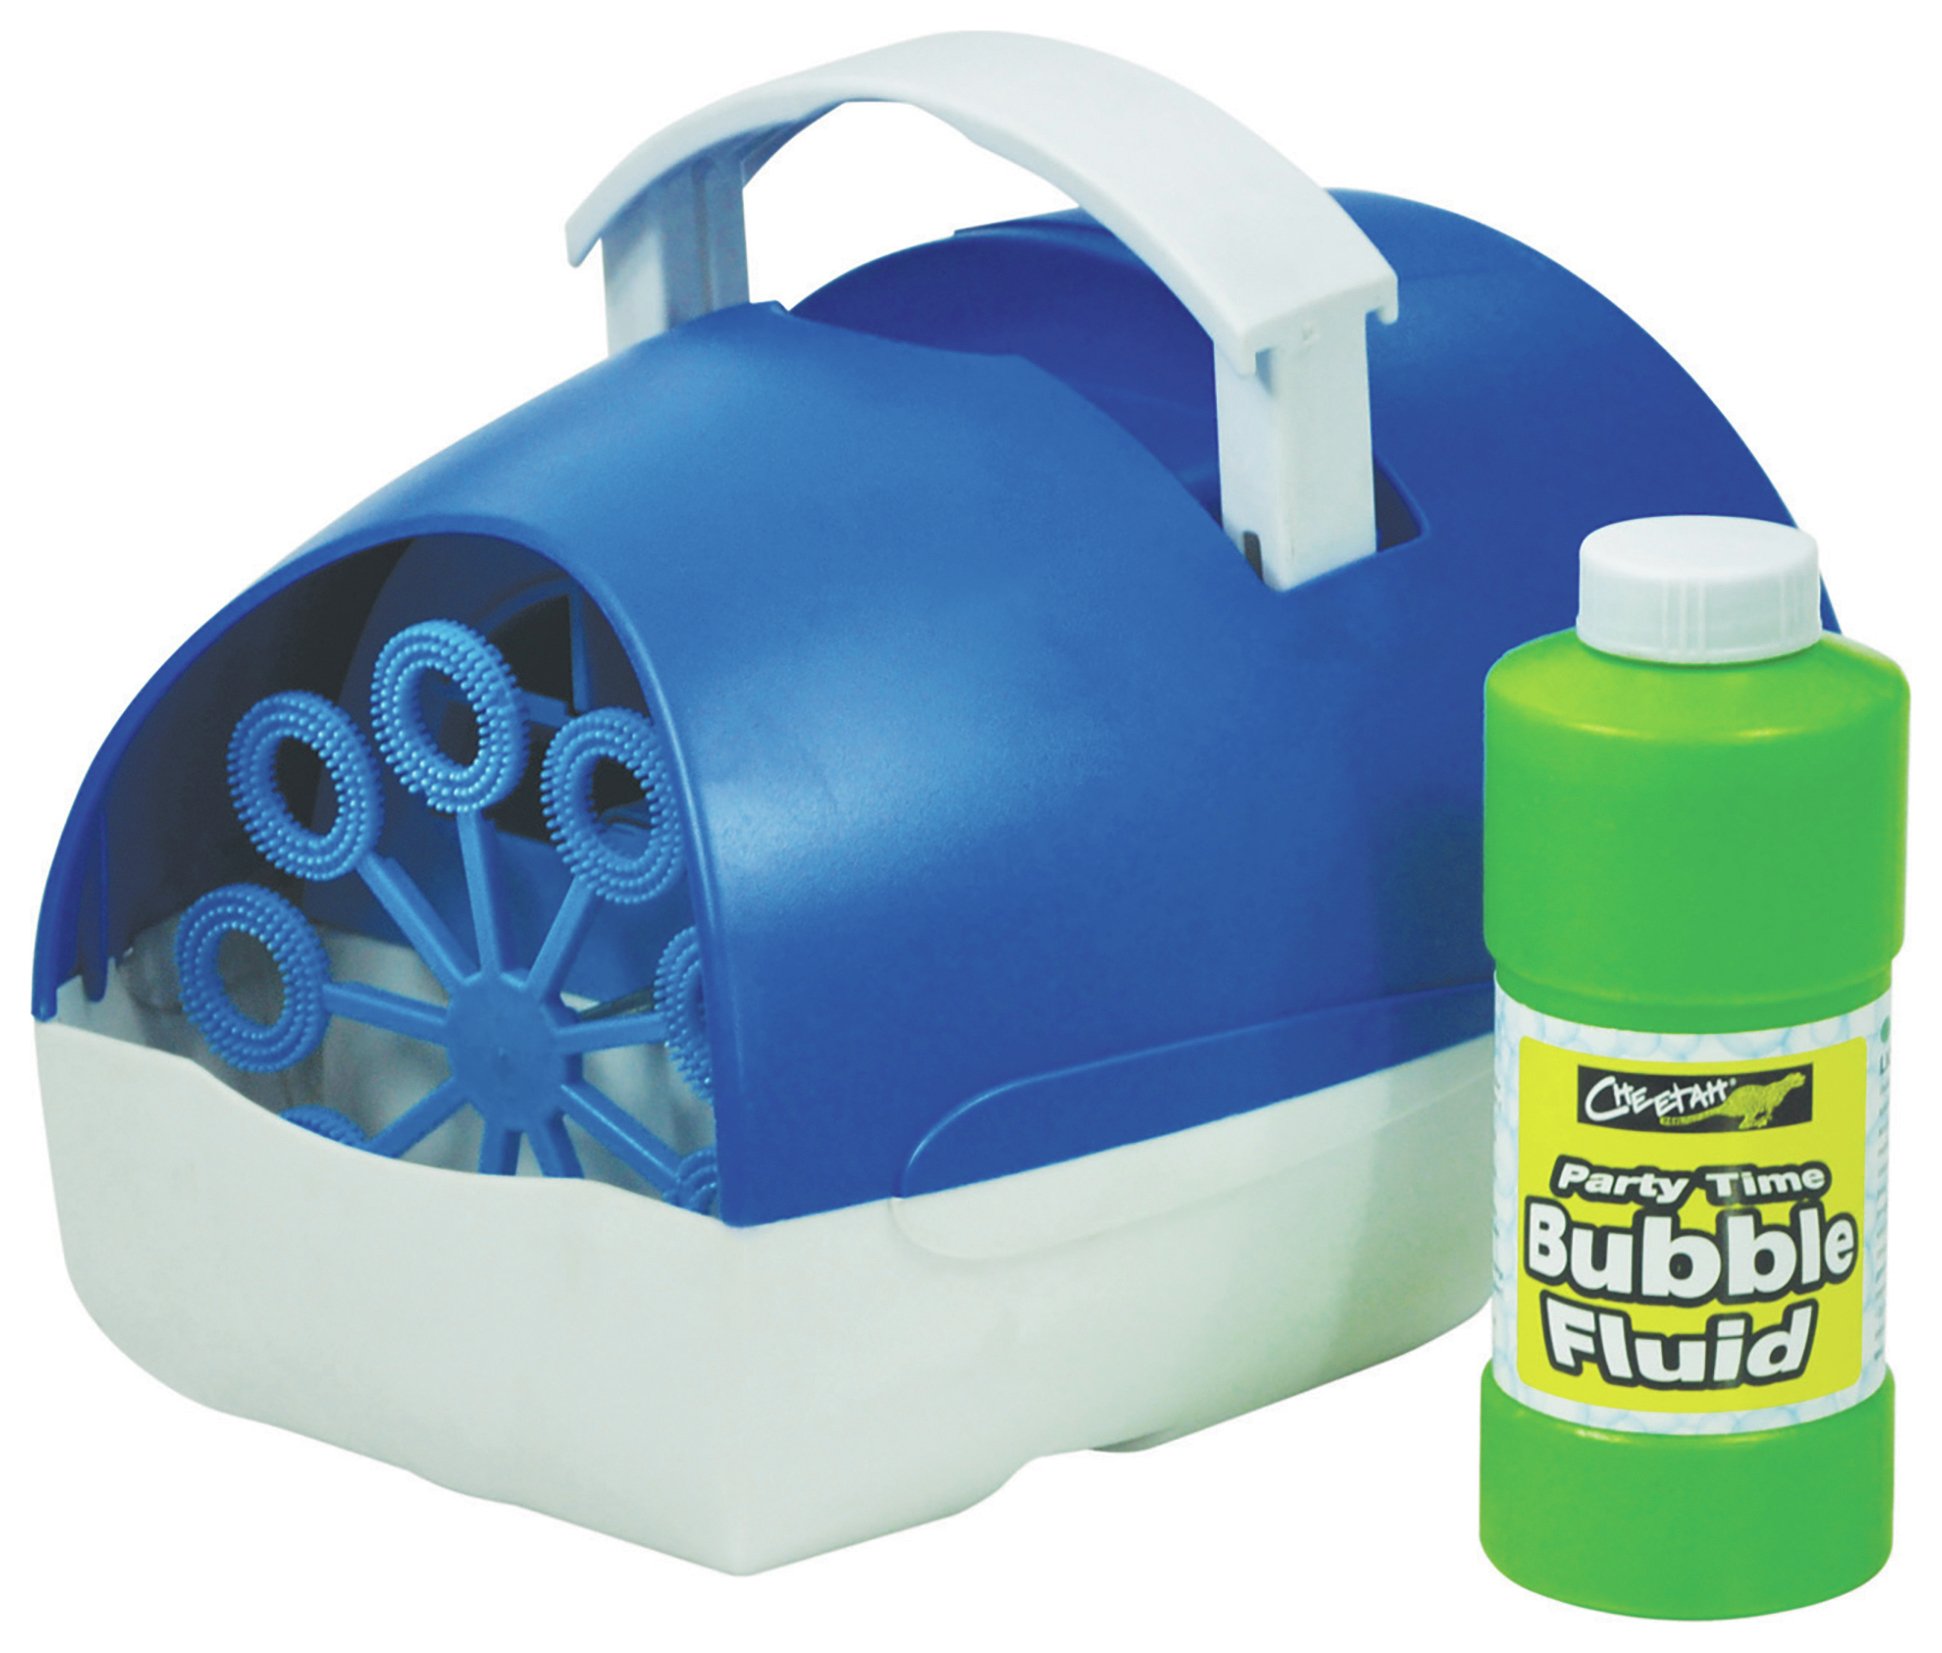 Cheetah Party Time Battery Operated Bubble Machine - Blue